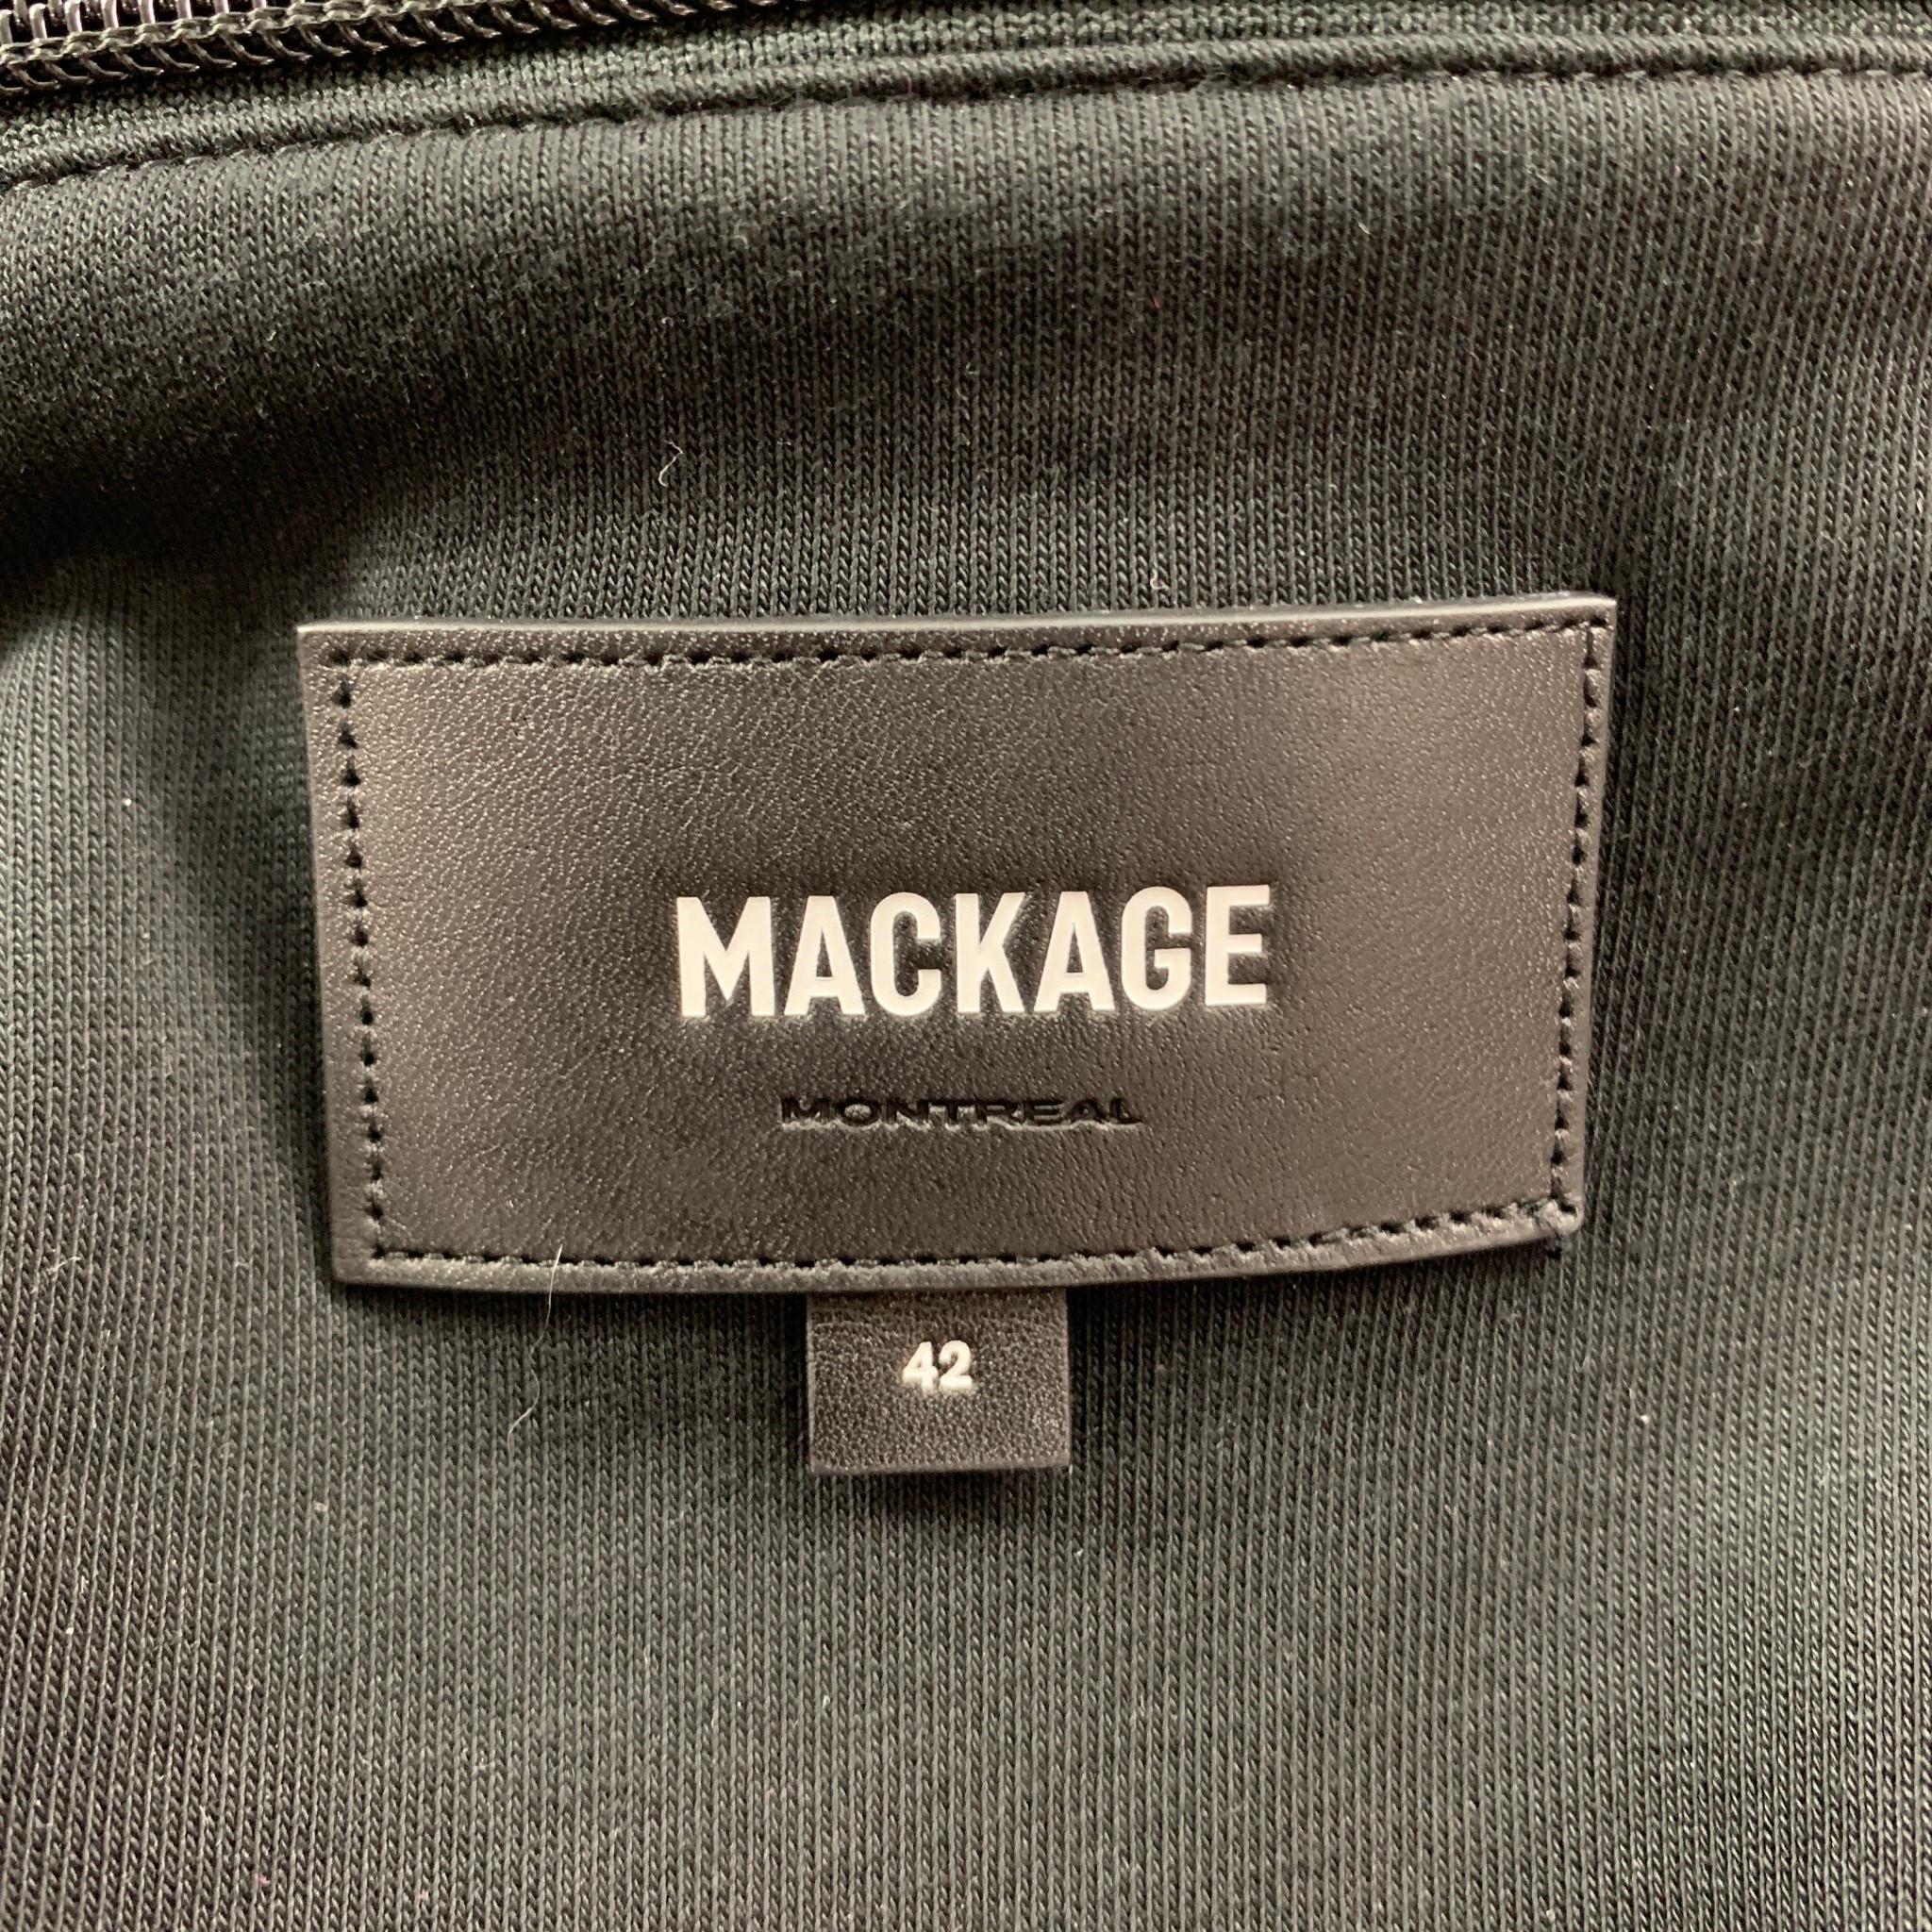 MACKAGE jacket comes in a black polyester featuring a hooded style, detachable layer, ribbed hem, front pockets, and a zip up closure. 

Very Good Pre-Owned Condition.
Marked: 42

Measurements:

Shoulder: 20 in.
Chest: 42 in.
Sleeve: 27 in.
Length: